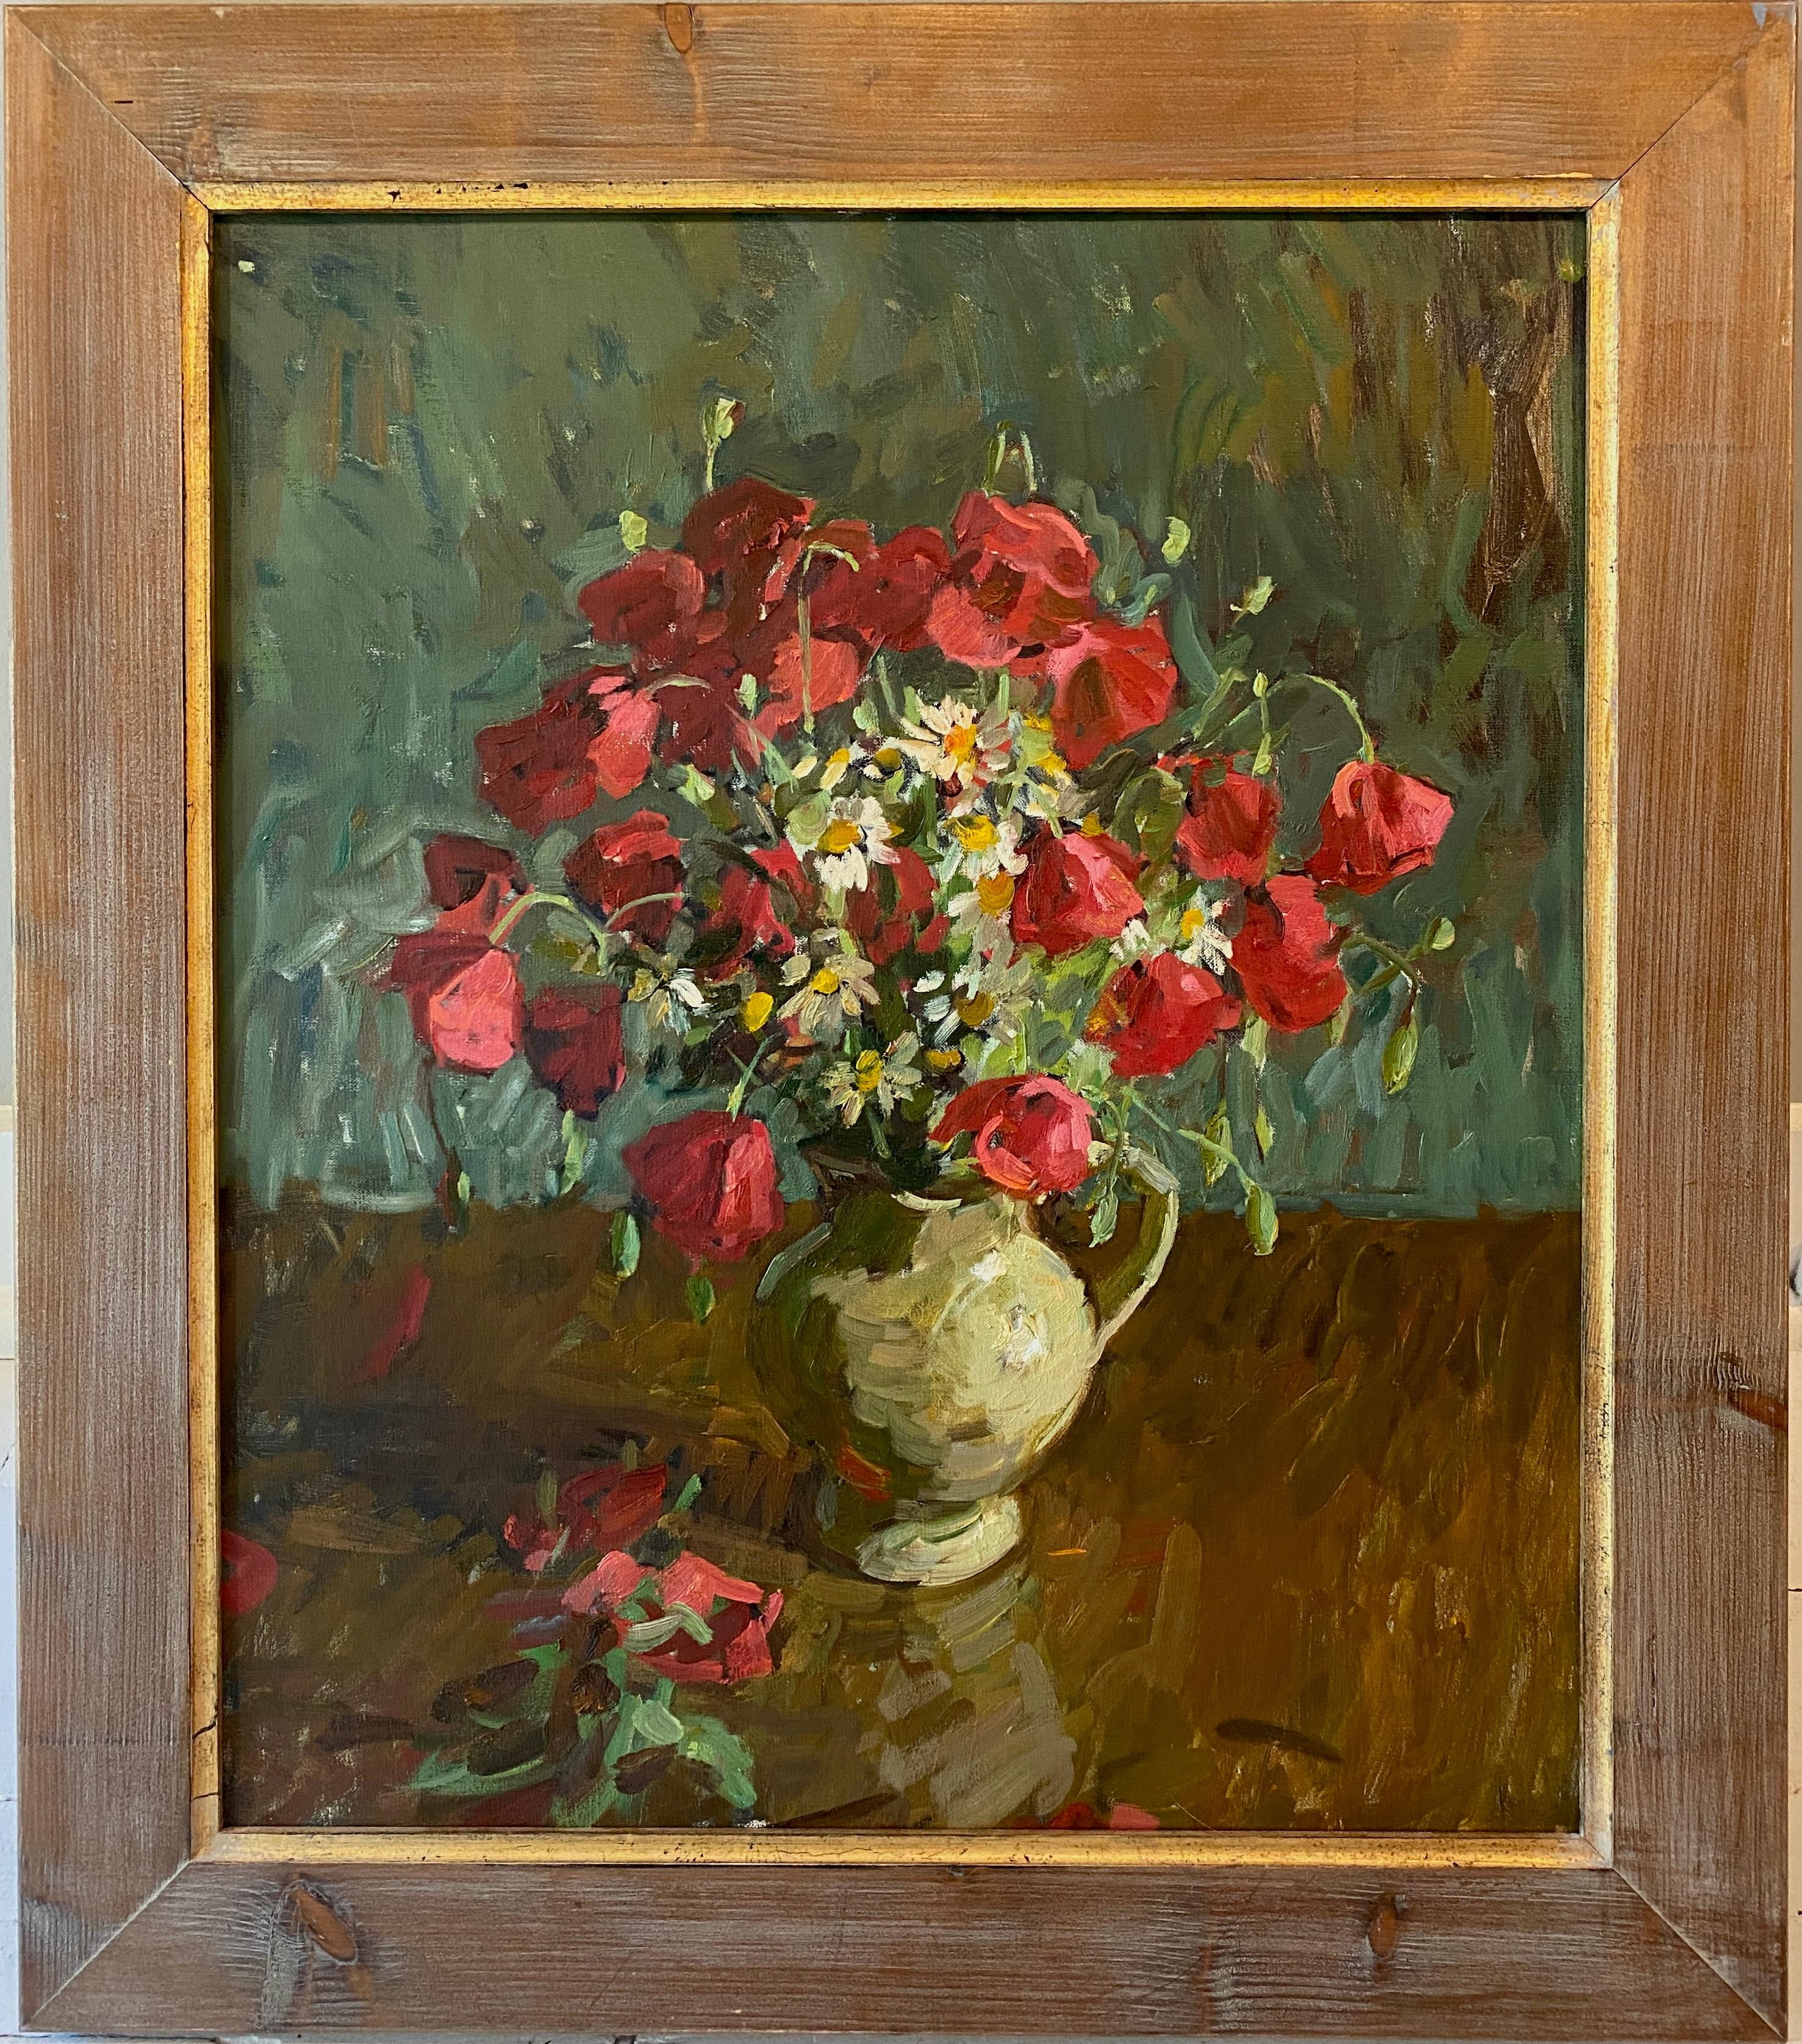 Ben Fenske Interior Painting - "Poppies and Daisies" impressionist oil painting of bright bouquet still life